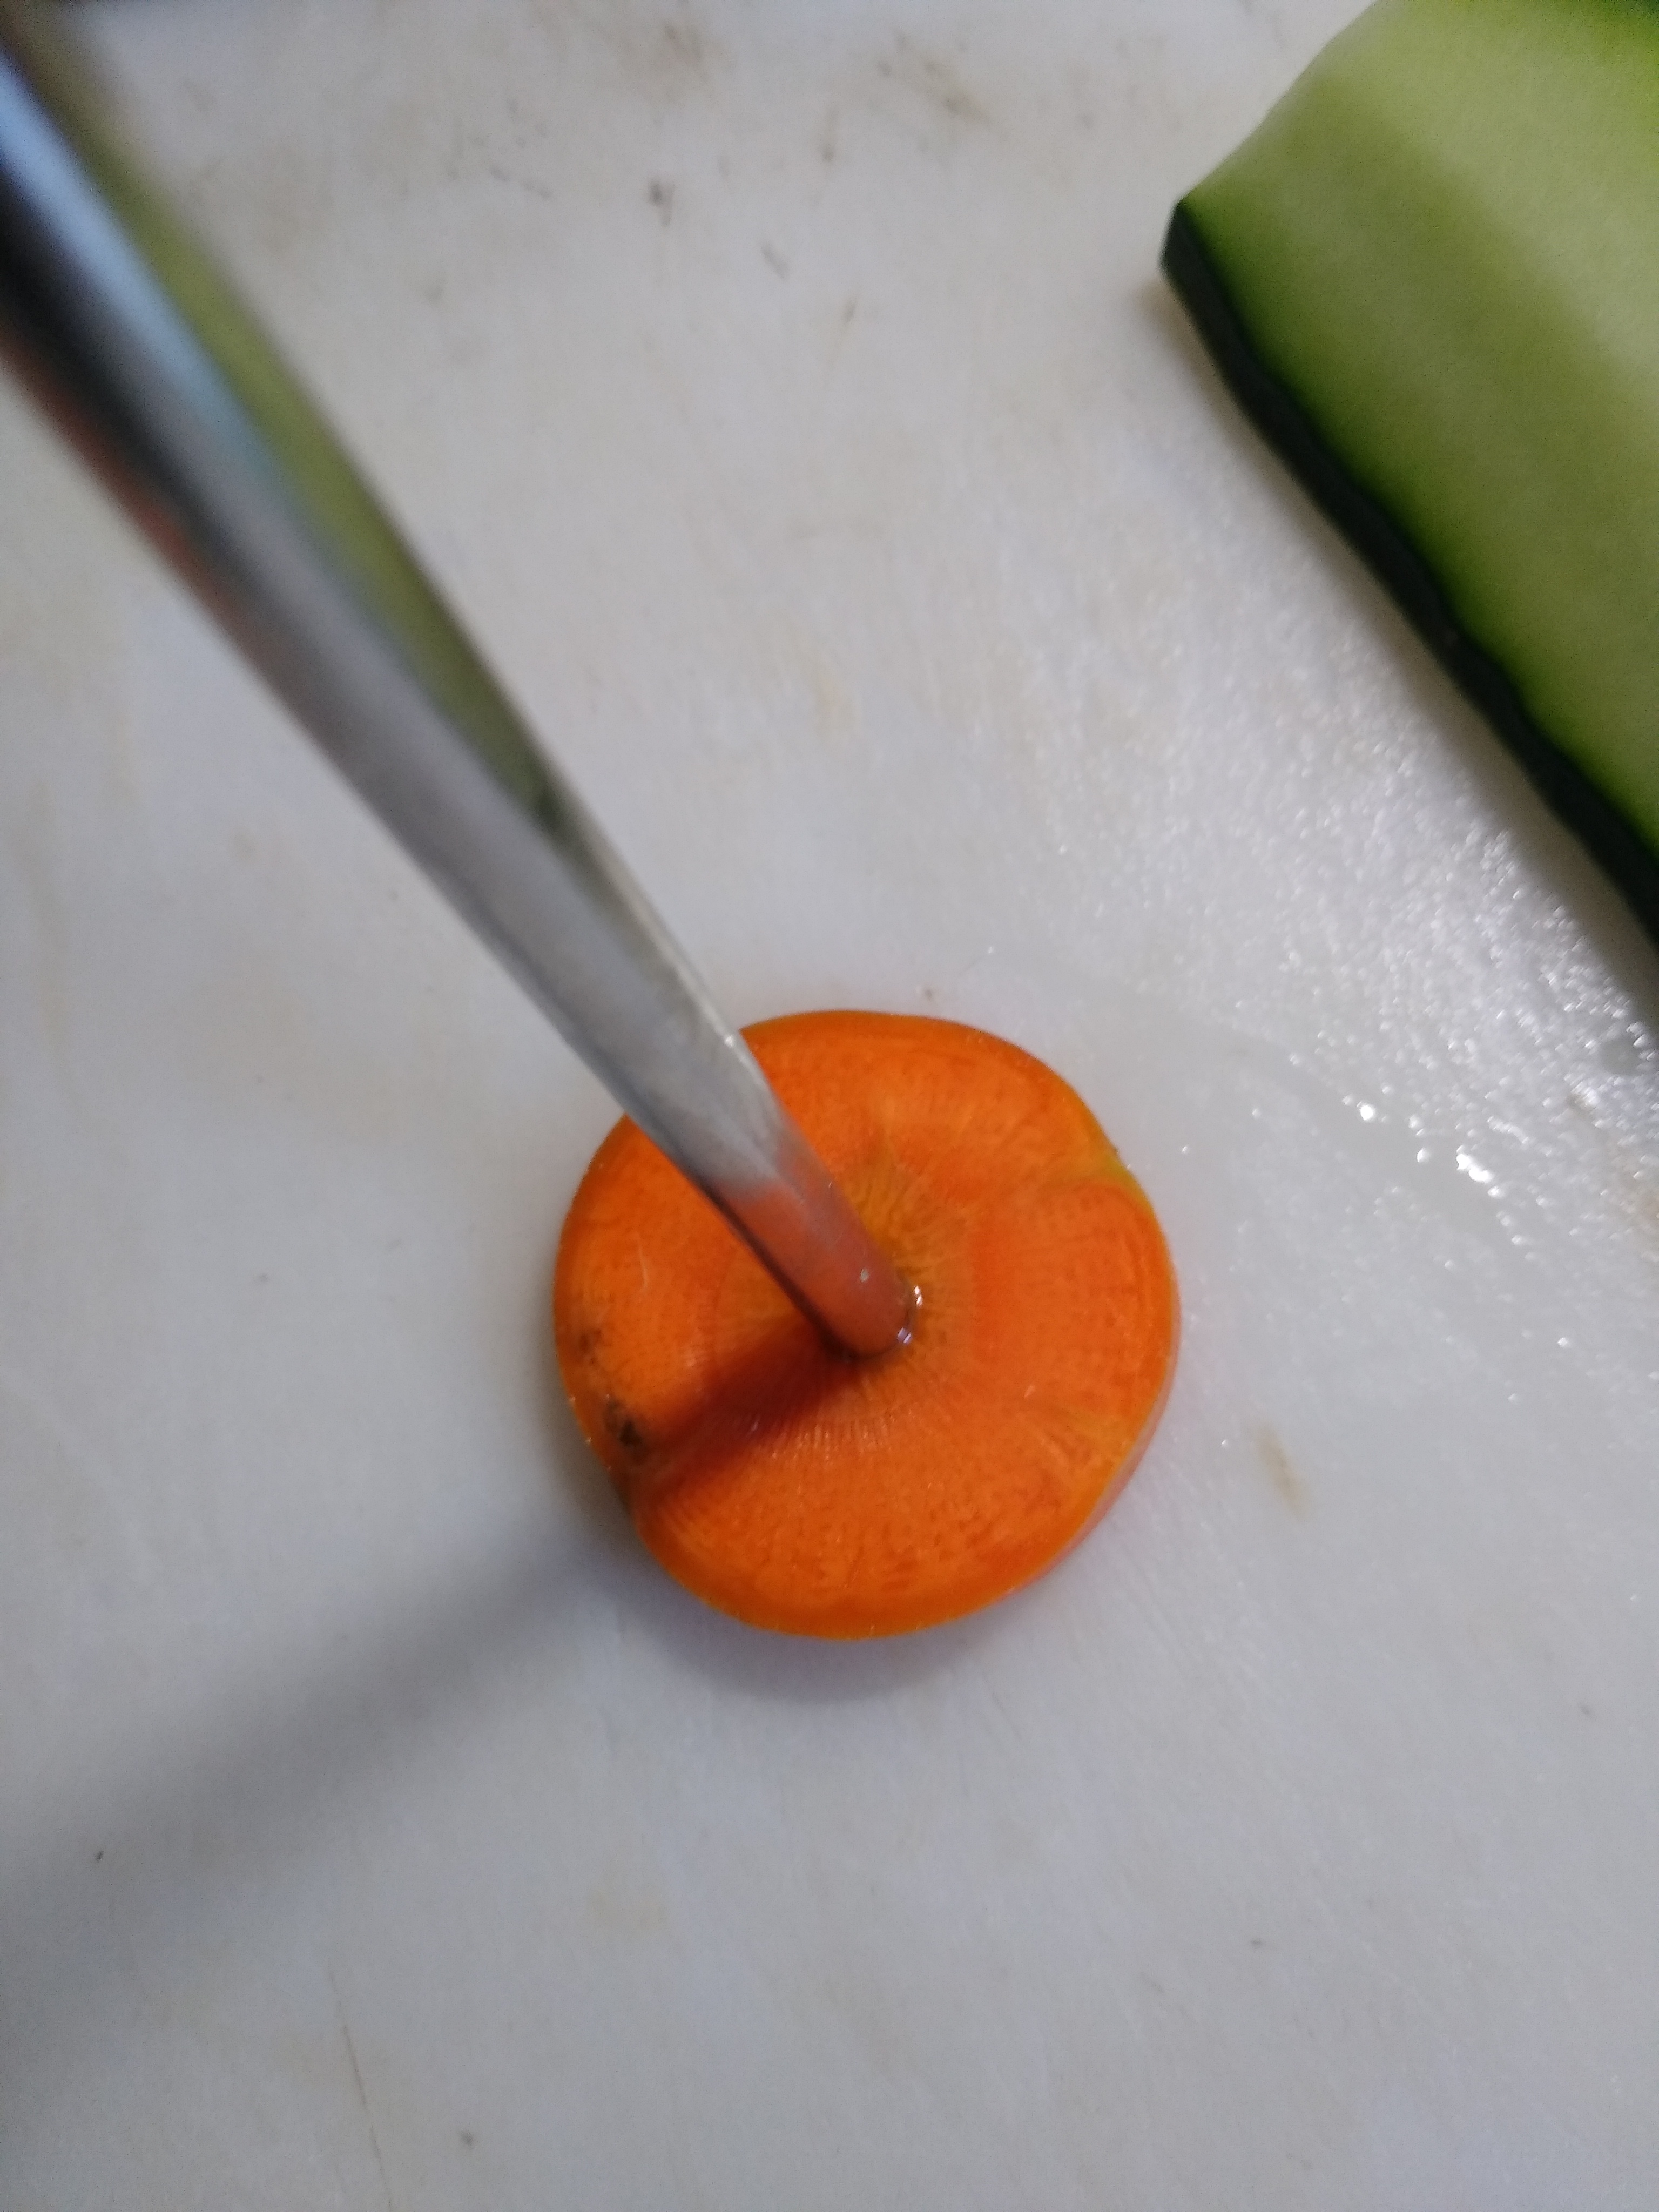 Close up of stainless steel straw punching hole in center of carrot slice.